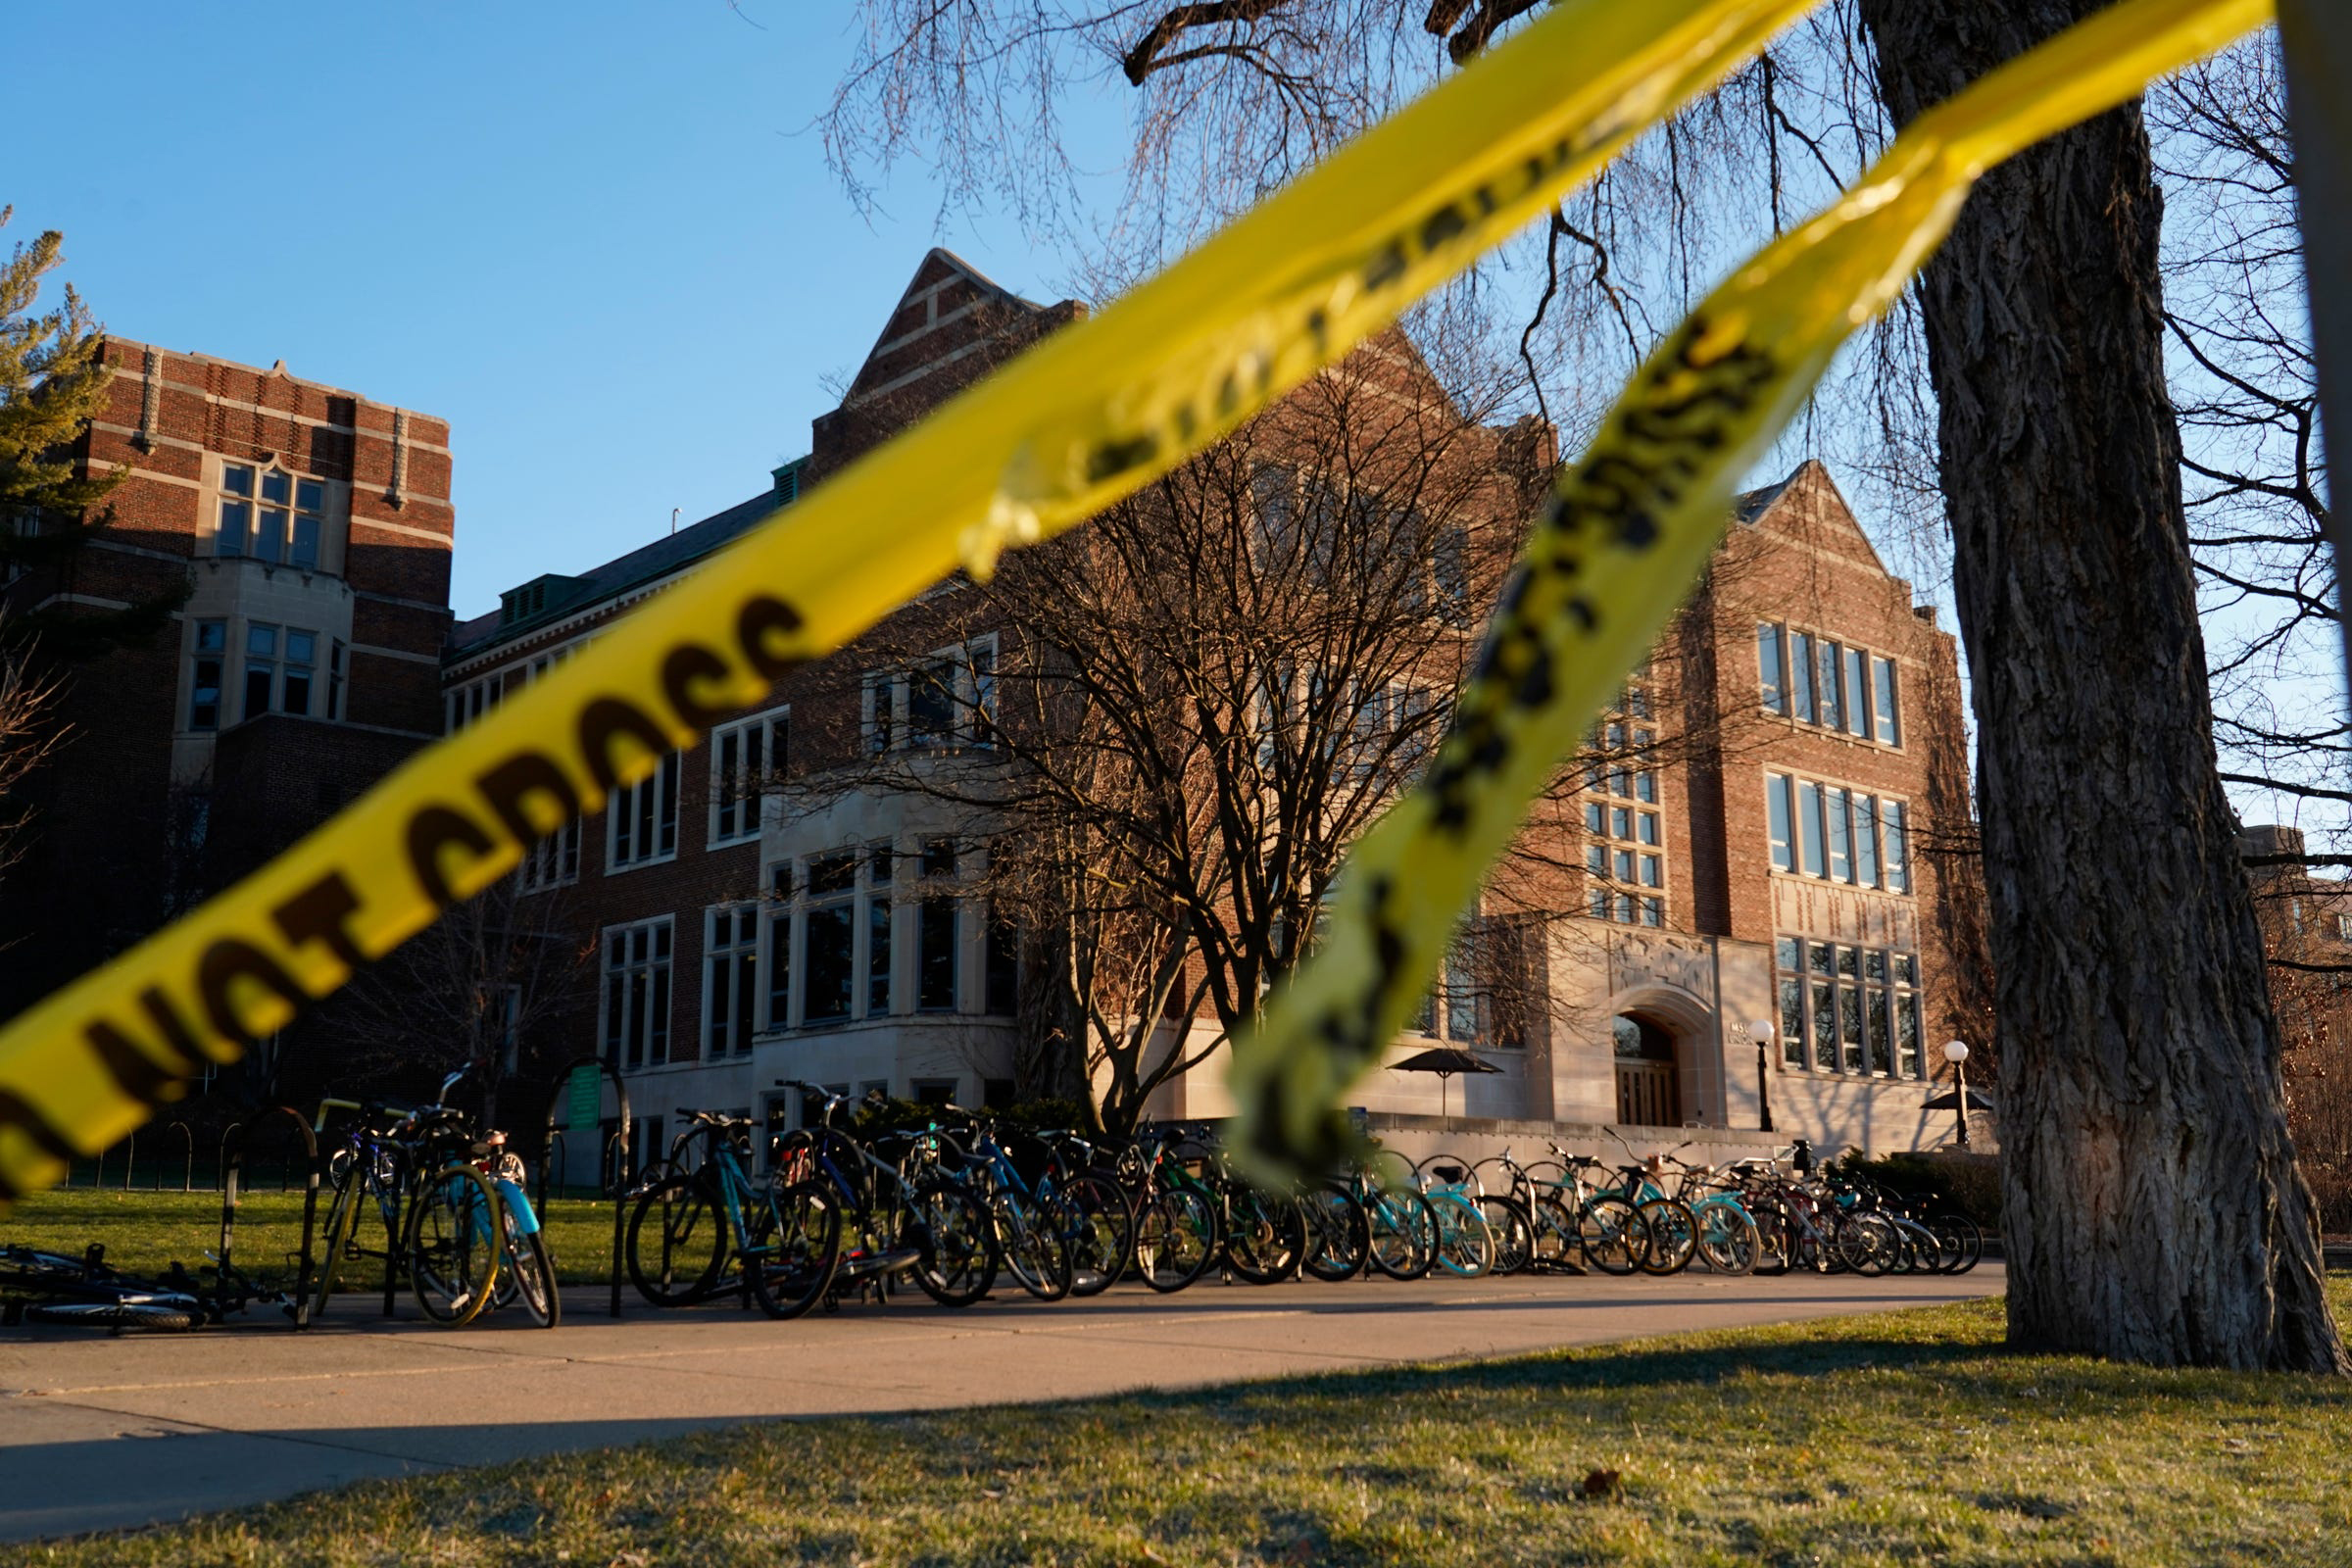 PHOTO: Police tape surrounds the Michigan State University Union on Feb.14, 2023 in East Lansing, Mich.